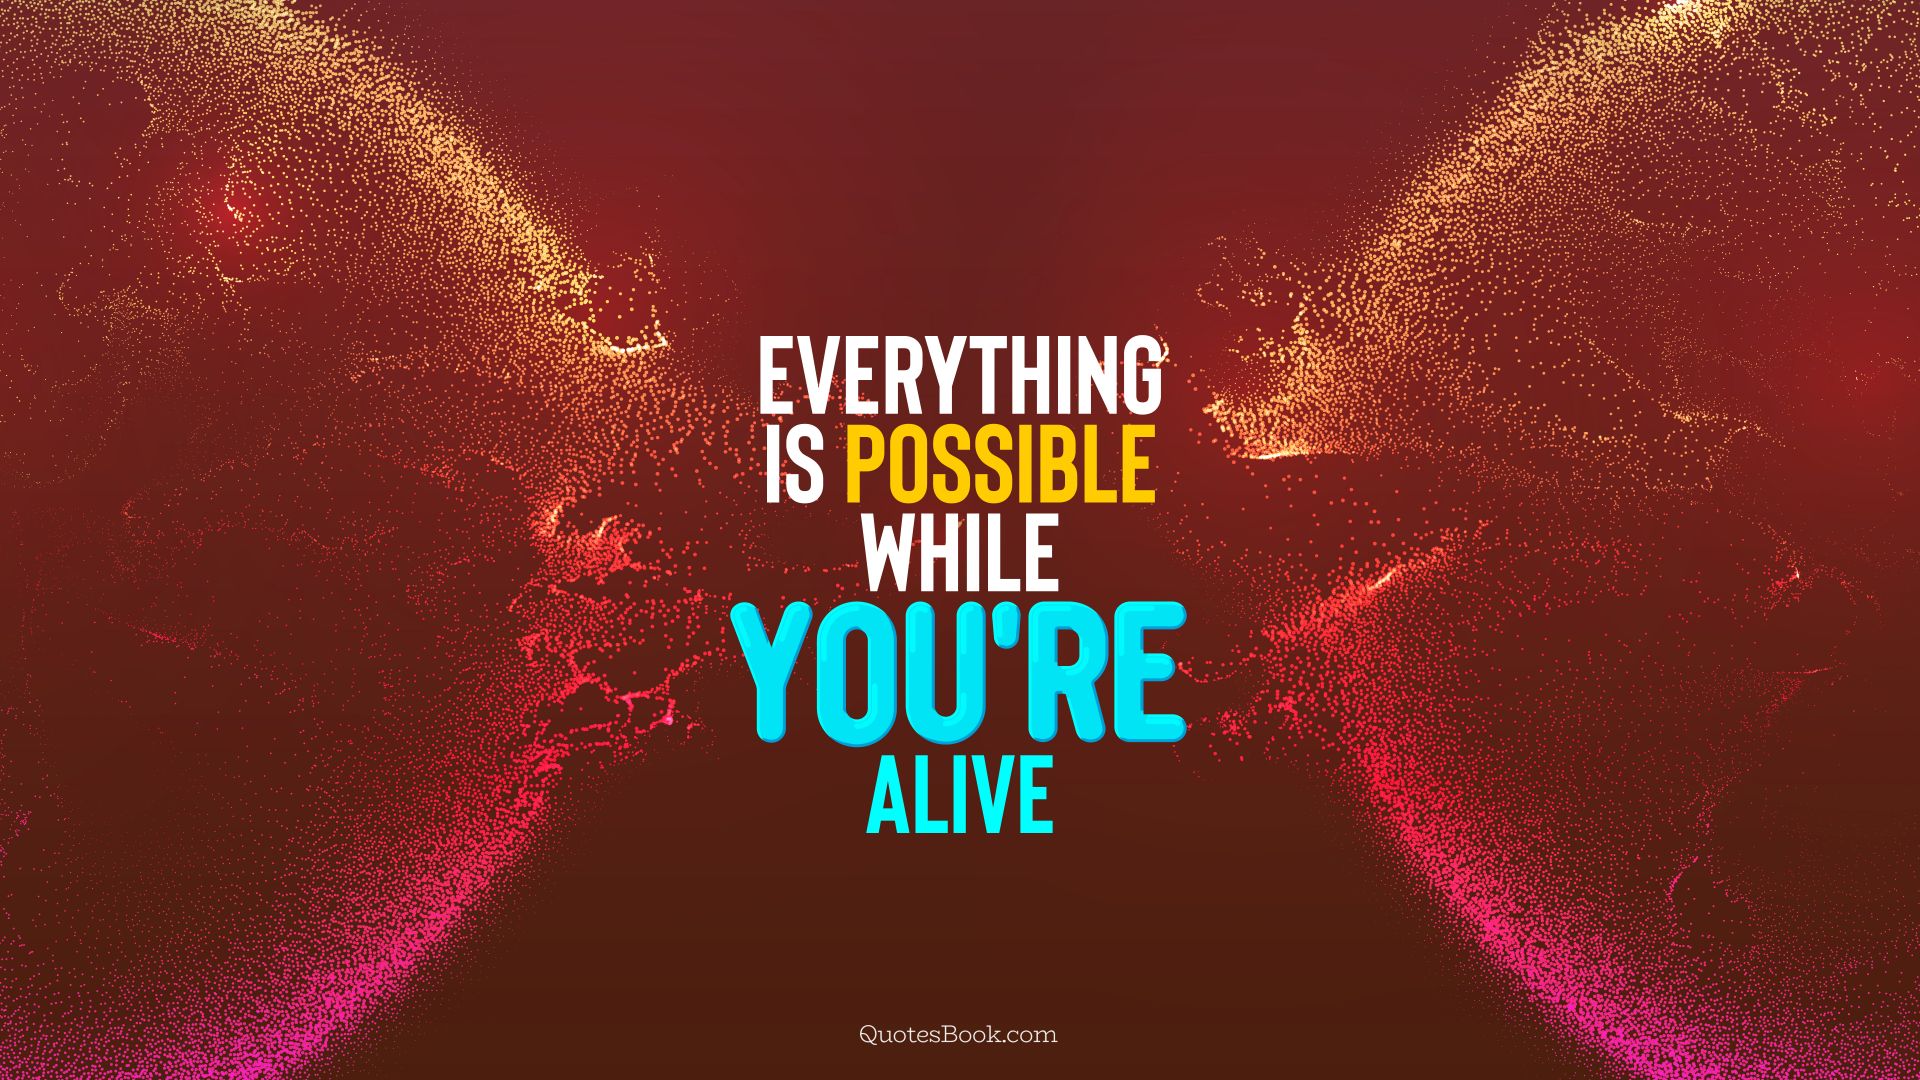 Everything is possible while you’re alive. - Quote by QuotesBook